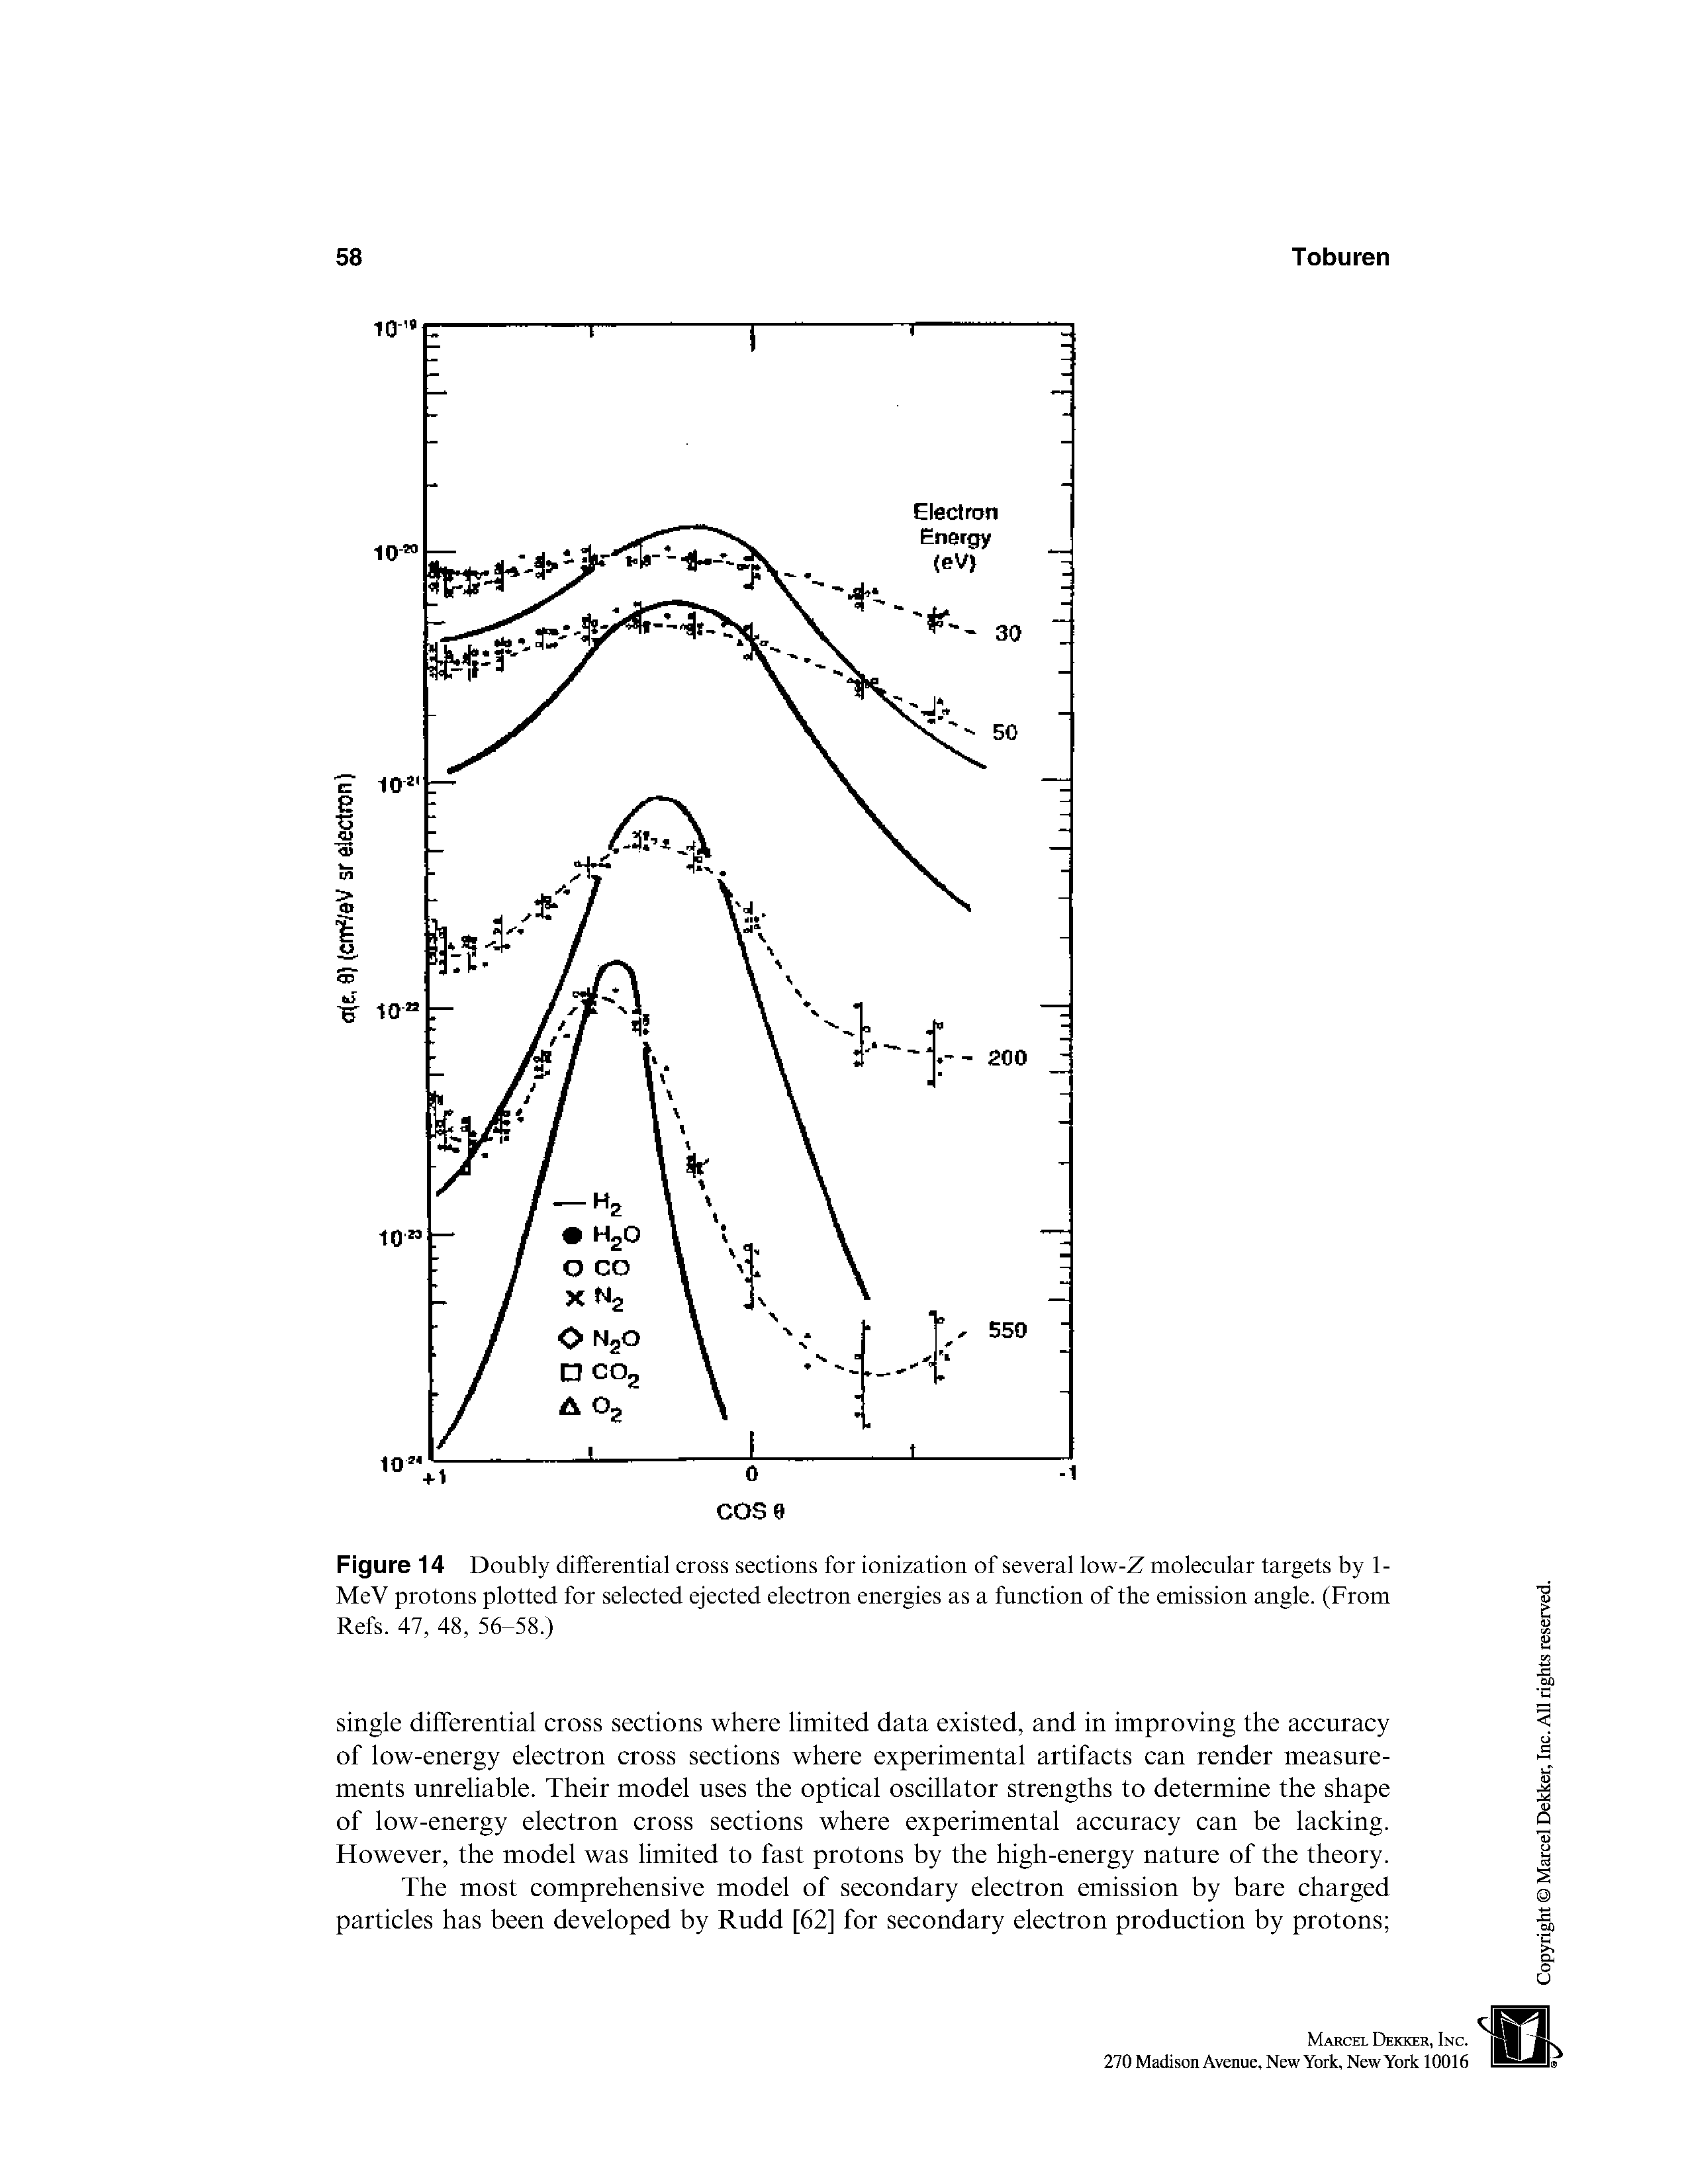 Figure 14 Doubly differential cross sections for ionization of several low-Z molecular targets by 1-MeV protons plotted for selected ejected electron energies as a function of the emission angle. (From Refs. 47, 48, 56-58.)...